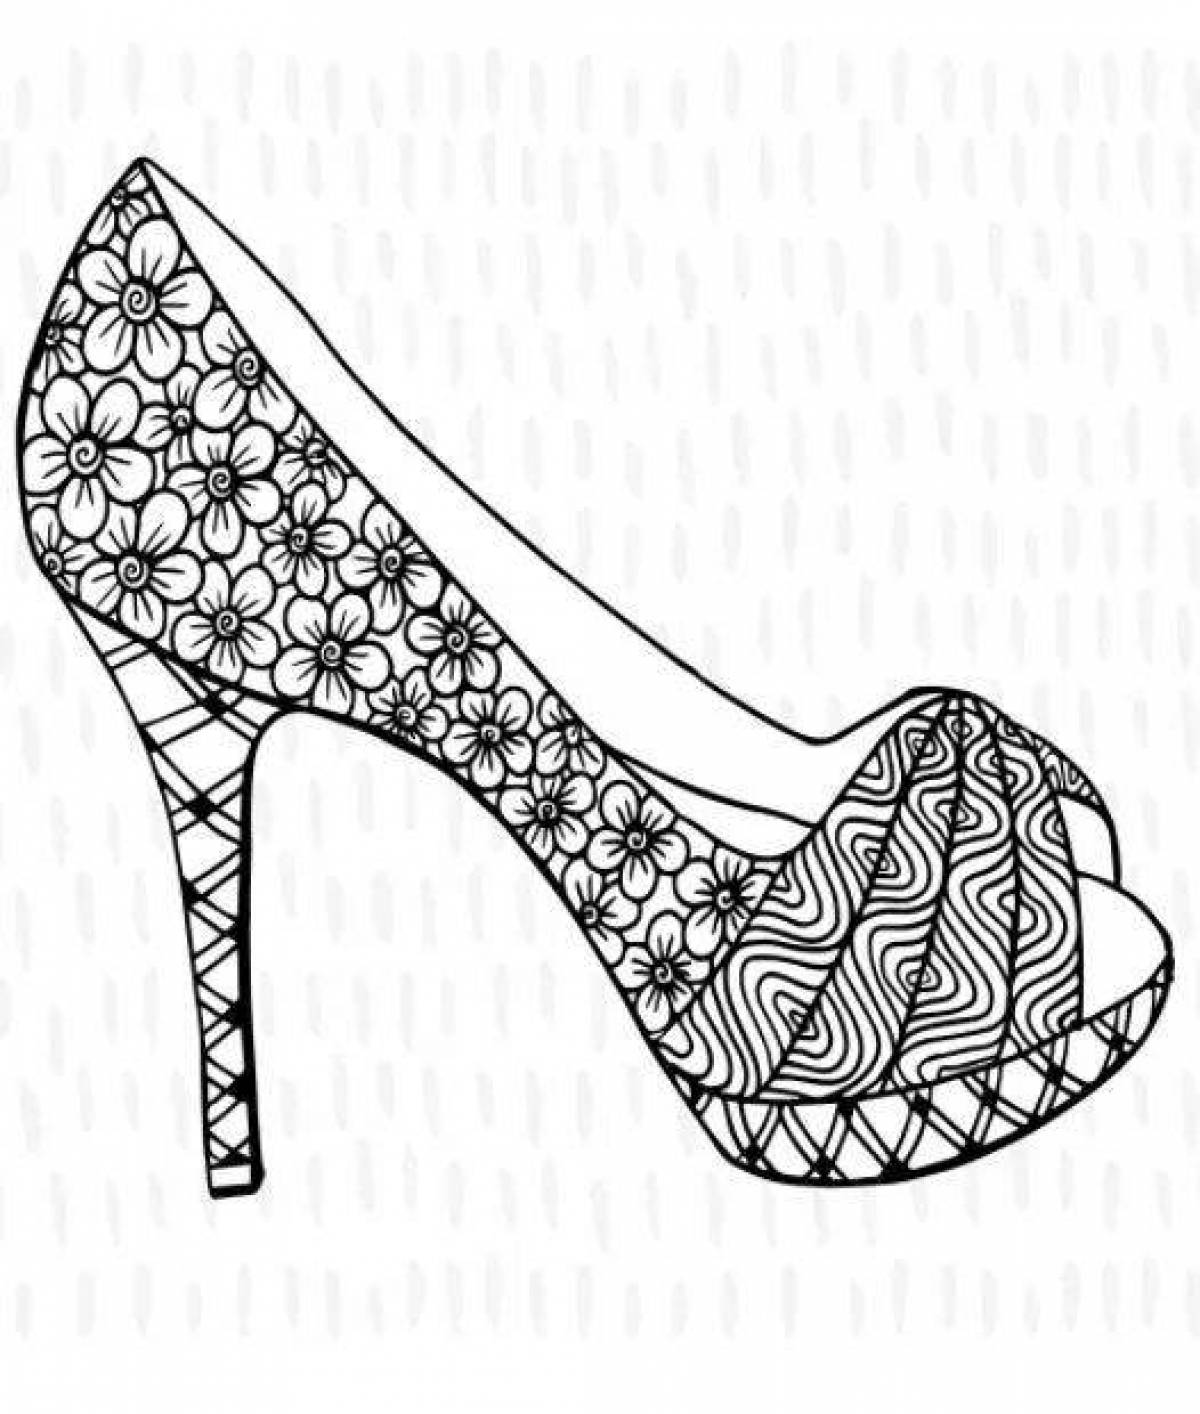 Coloring Page for Spectacular Shoes